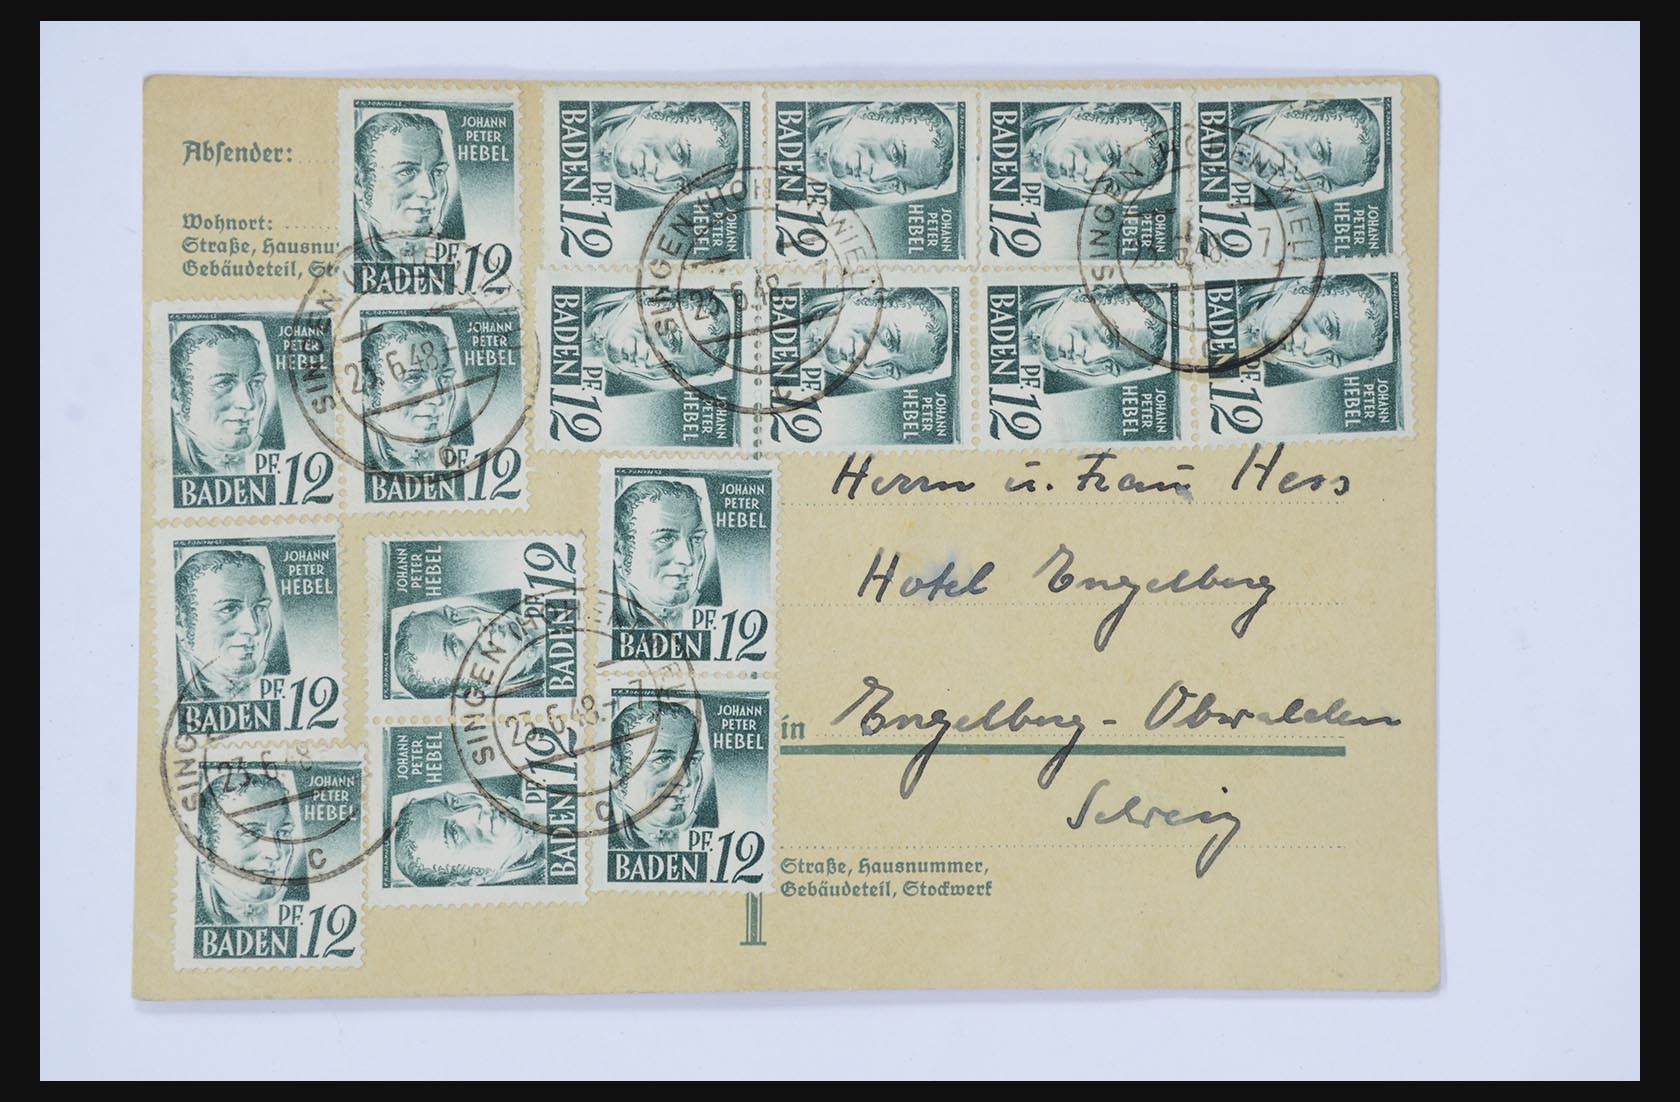 31581 039 - 31581 Germany covers and FDC's 1945-1981.